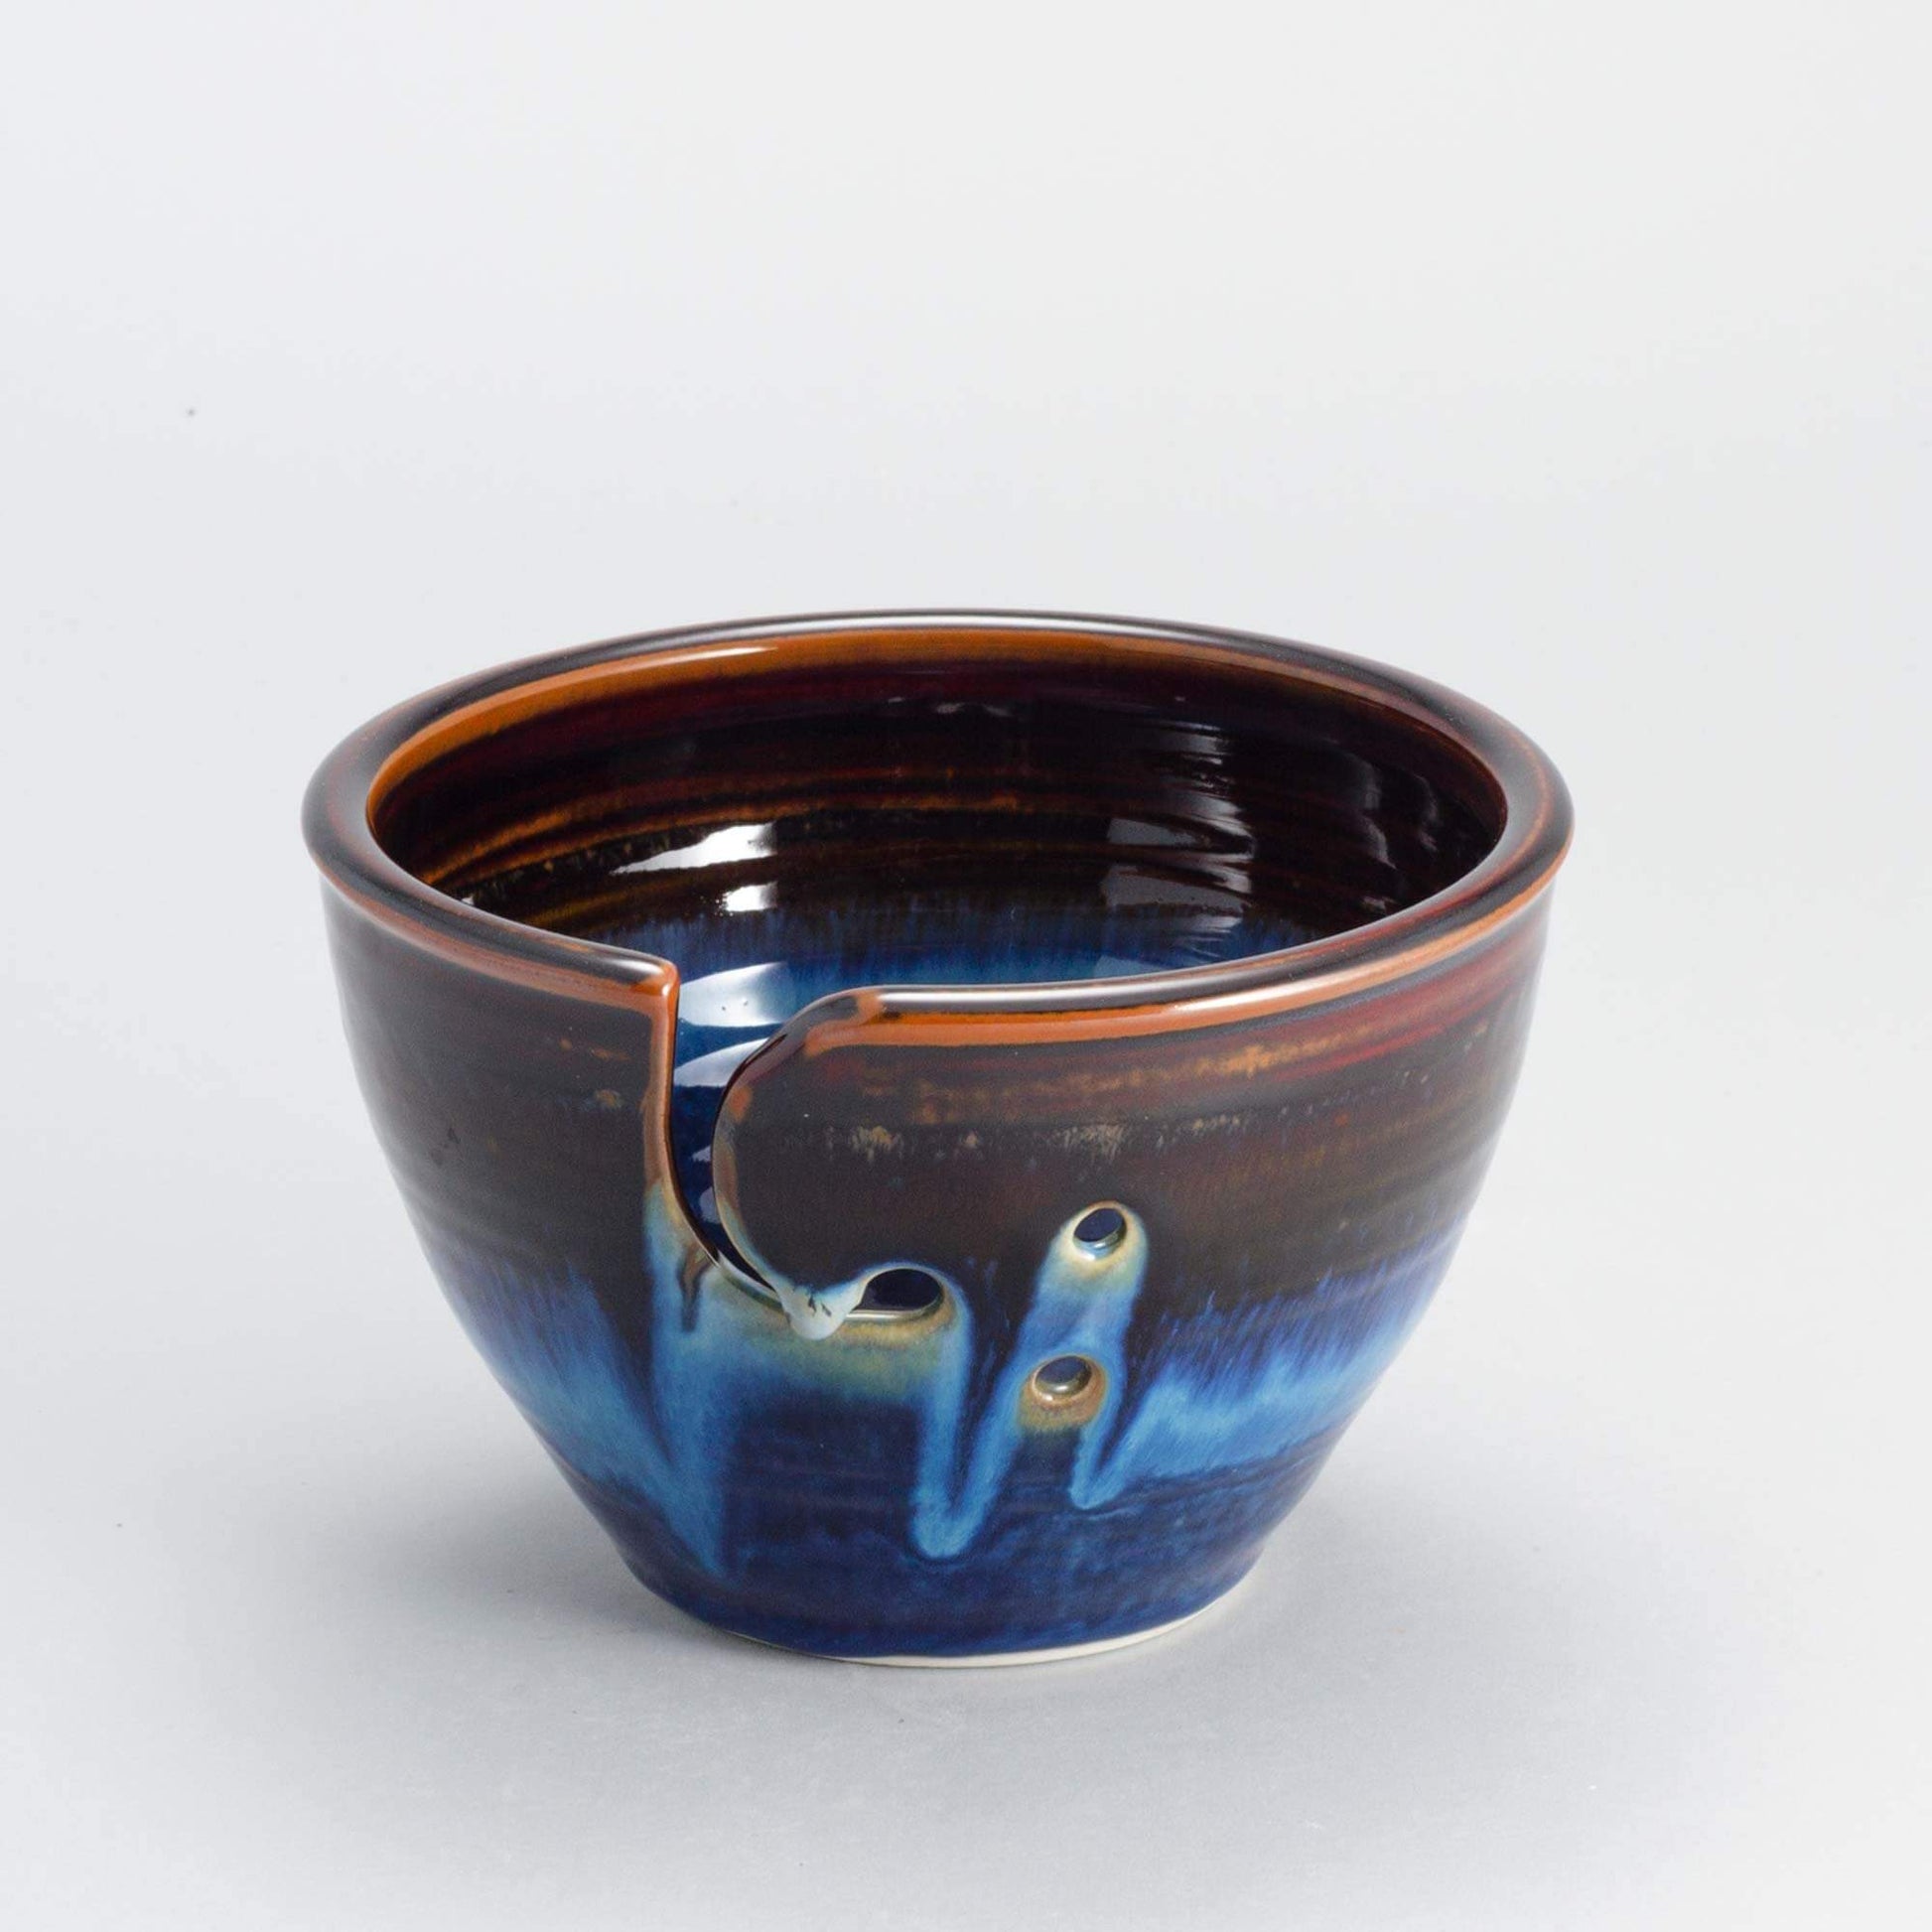 Knitting Bowl handmade by Georgetown Pottery in Maine in Blue Hamada pattern